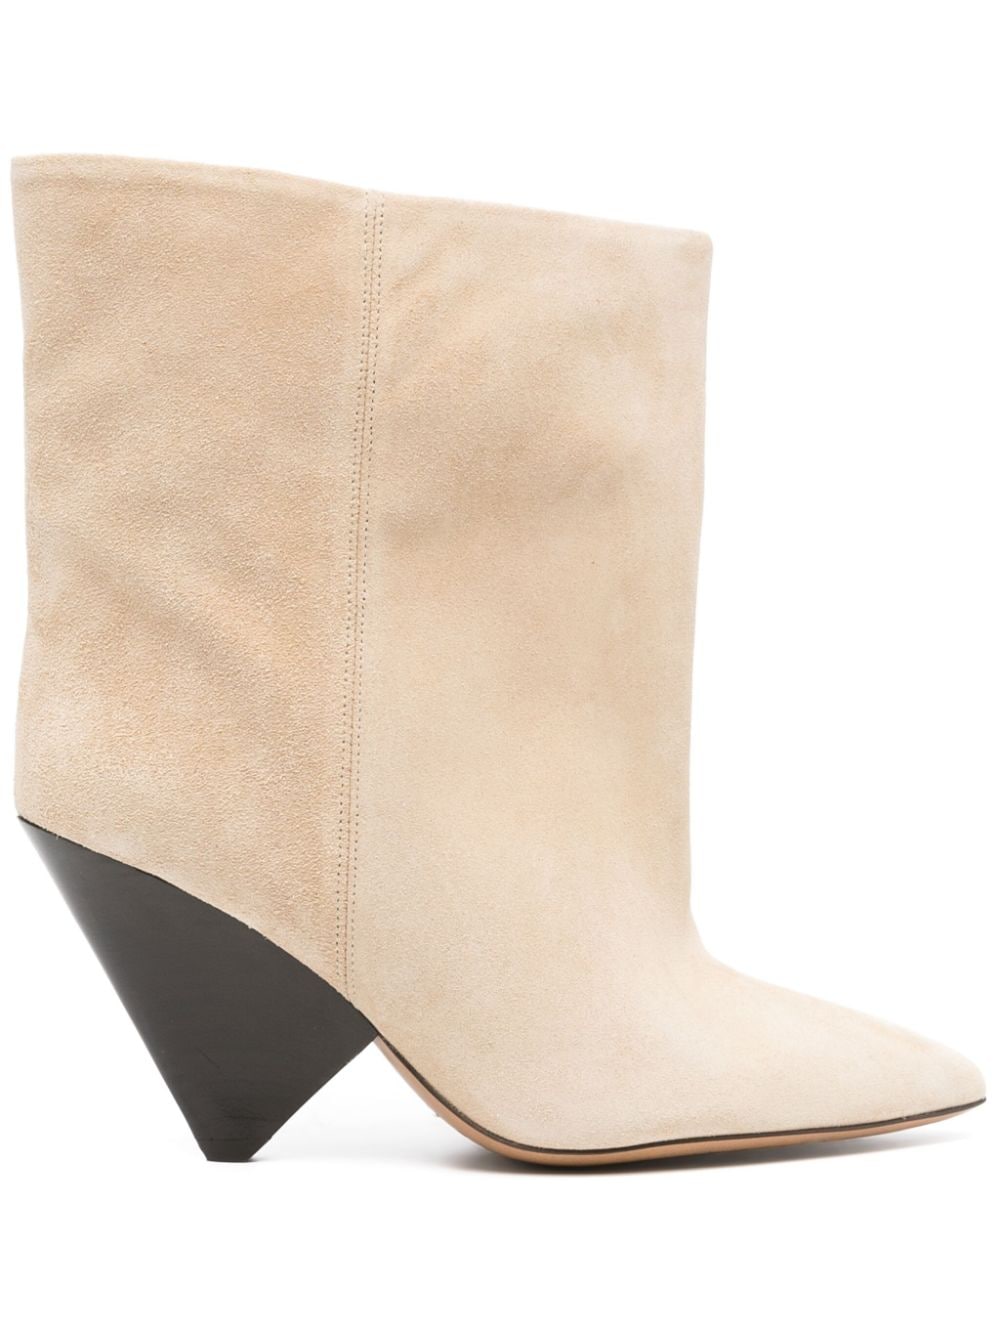 ISABEL MARANT Beige 100% Leather Pointed Toe Boots for Women